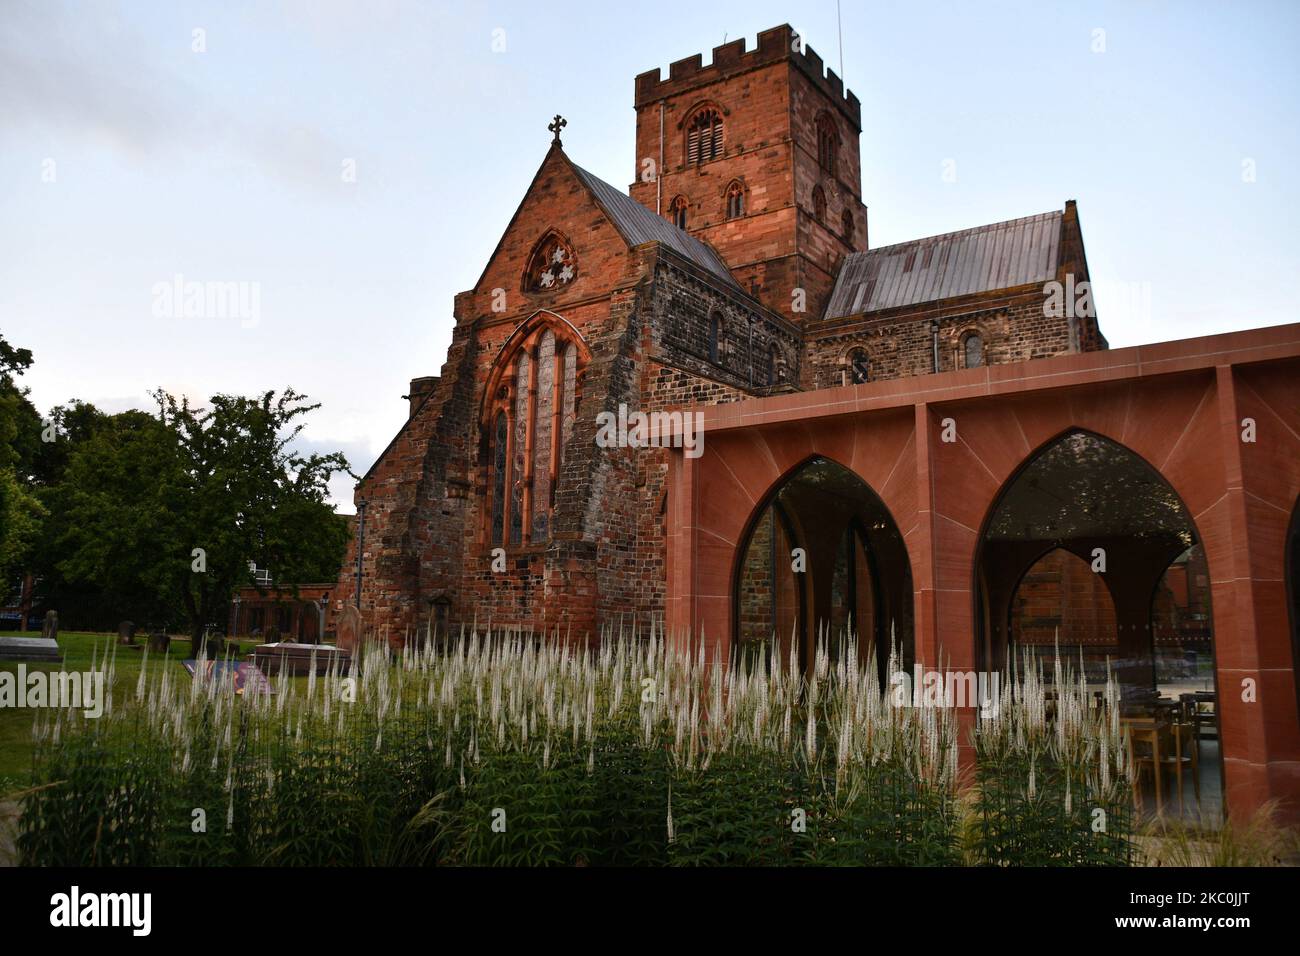 Carlisle Cathedral, with its recently added Fratry ( refectory) in the foreground, built from local red sandstone glowing in the early evening sun. Fi Stock Photo